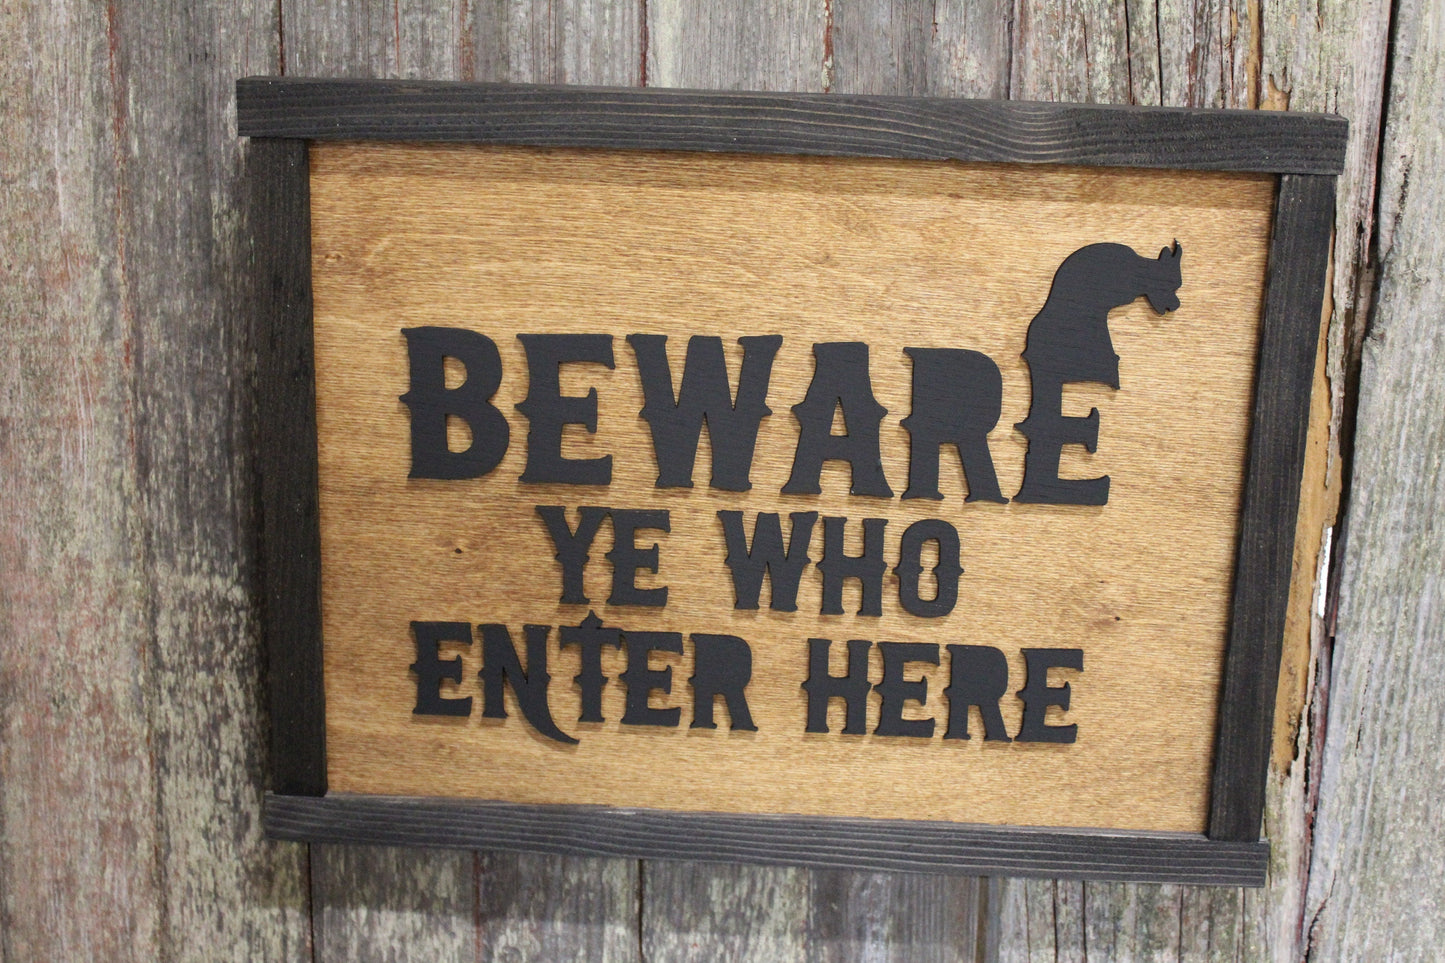 Gargoyle Beware Ye Who Enter Here Wood Sign 3D Raised Text Halloween Fall Brown Black Scary Warning Primitive Wall Hanging Decoration Decor